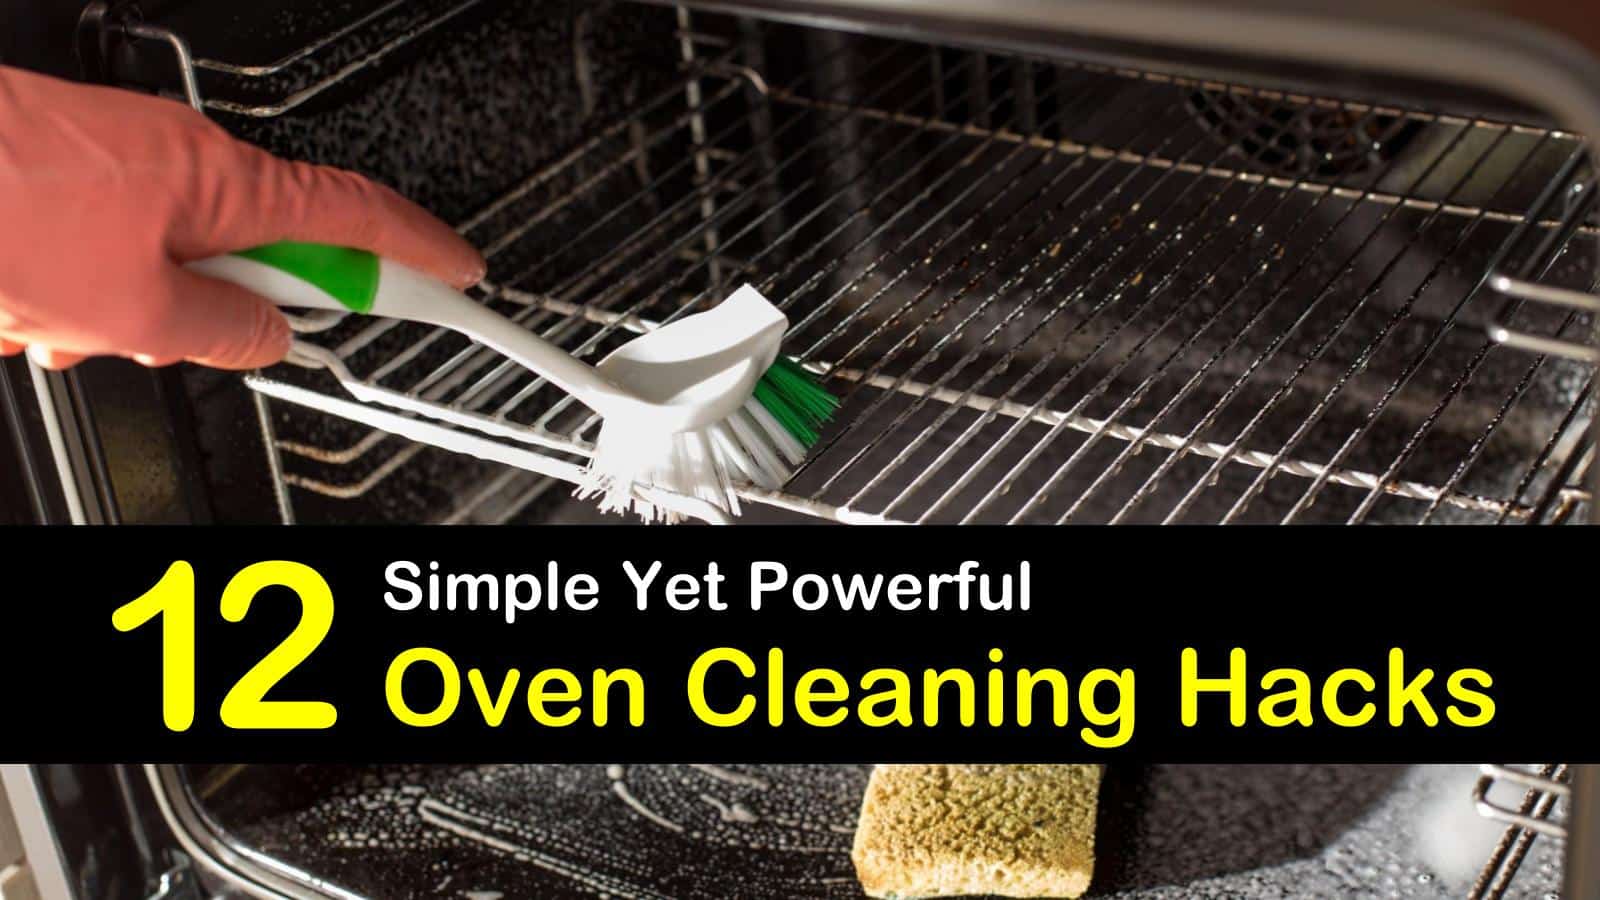 oven cleaning hacks titleimg1